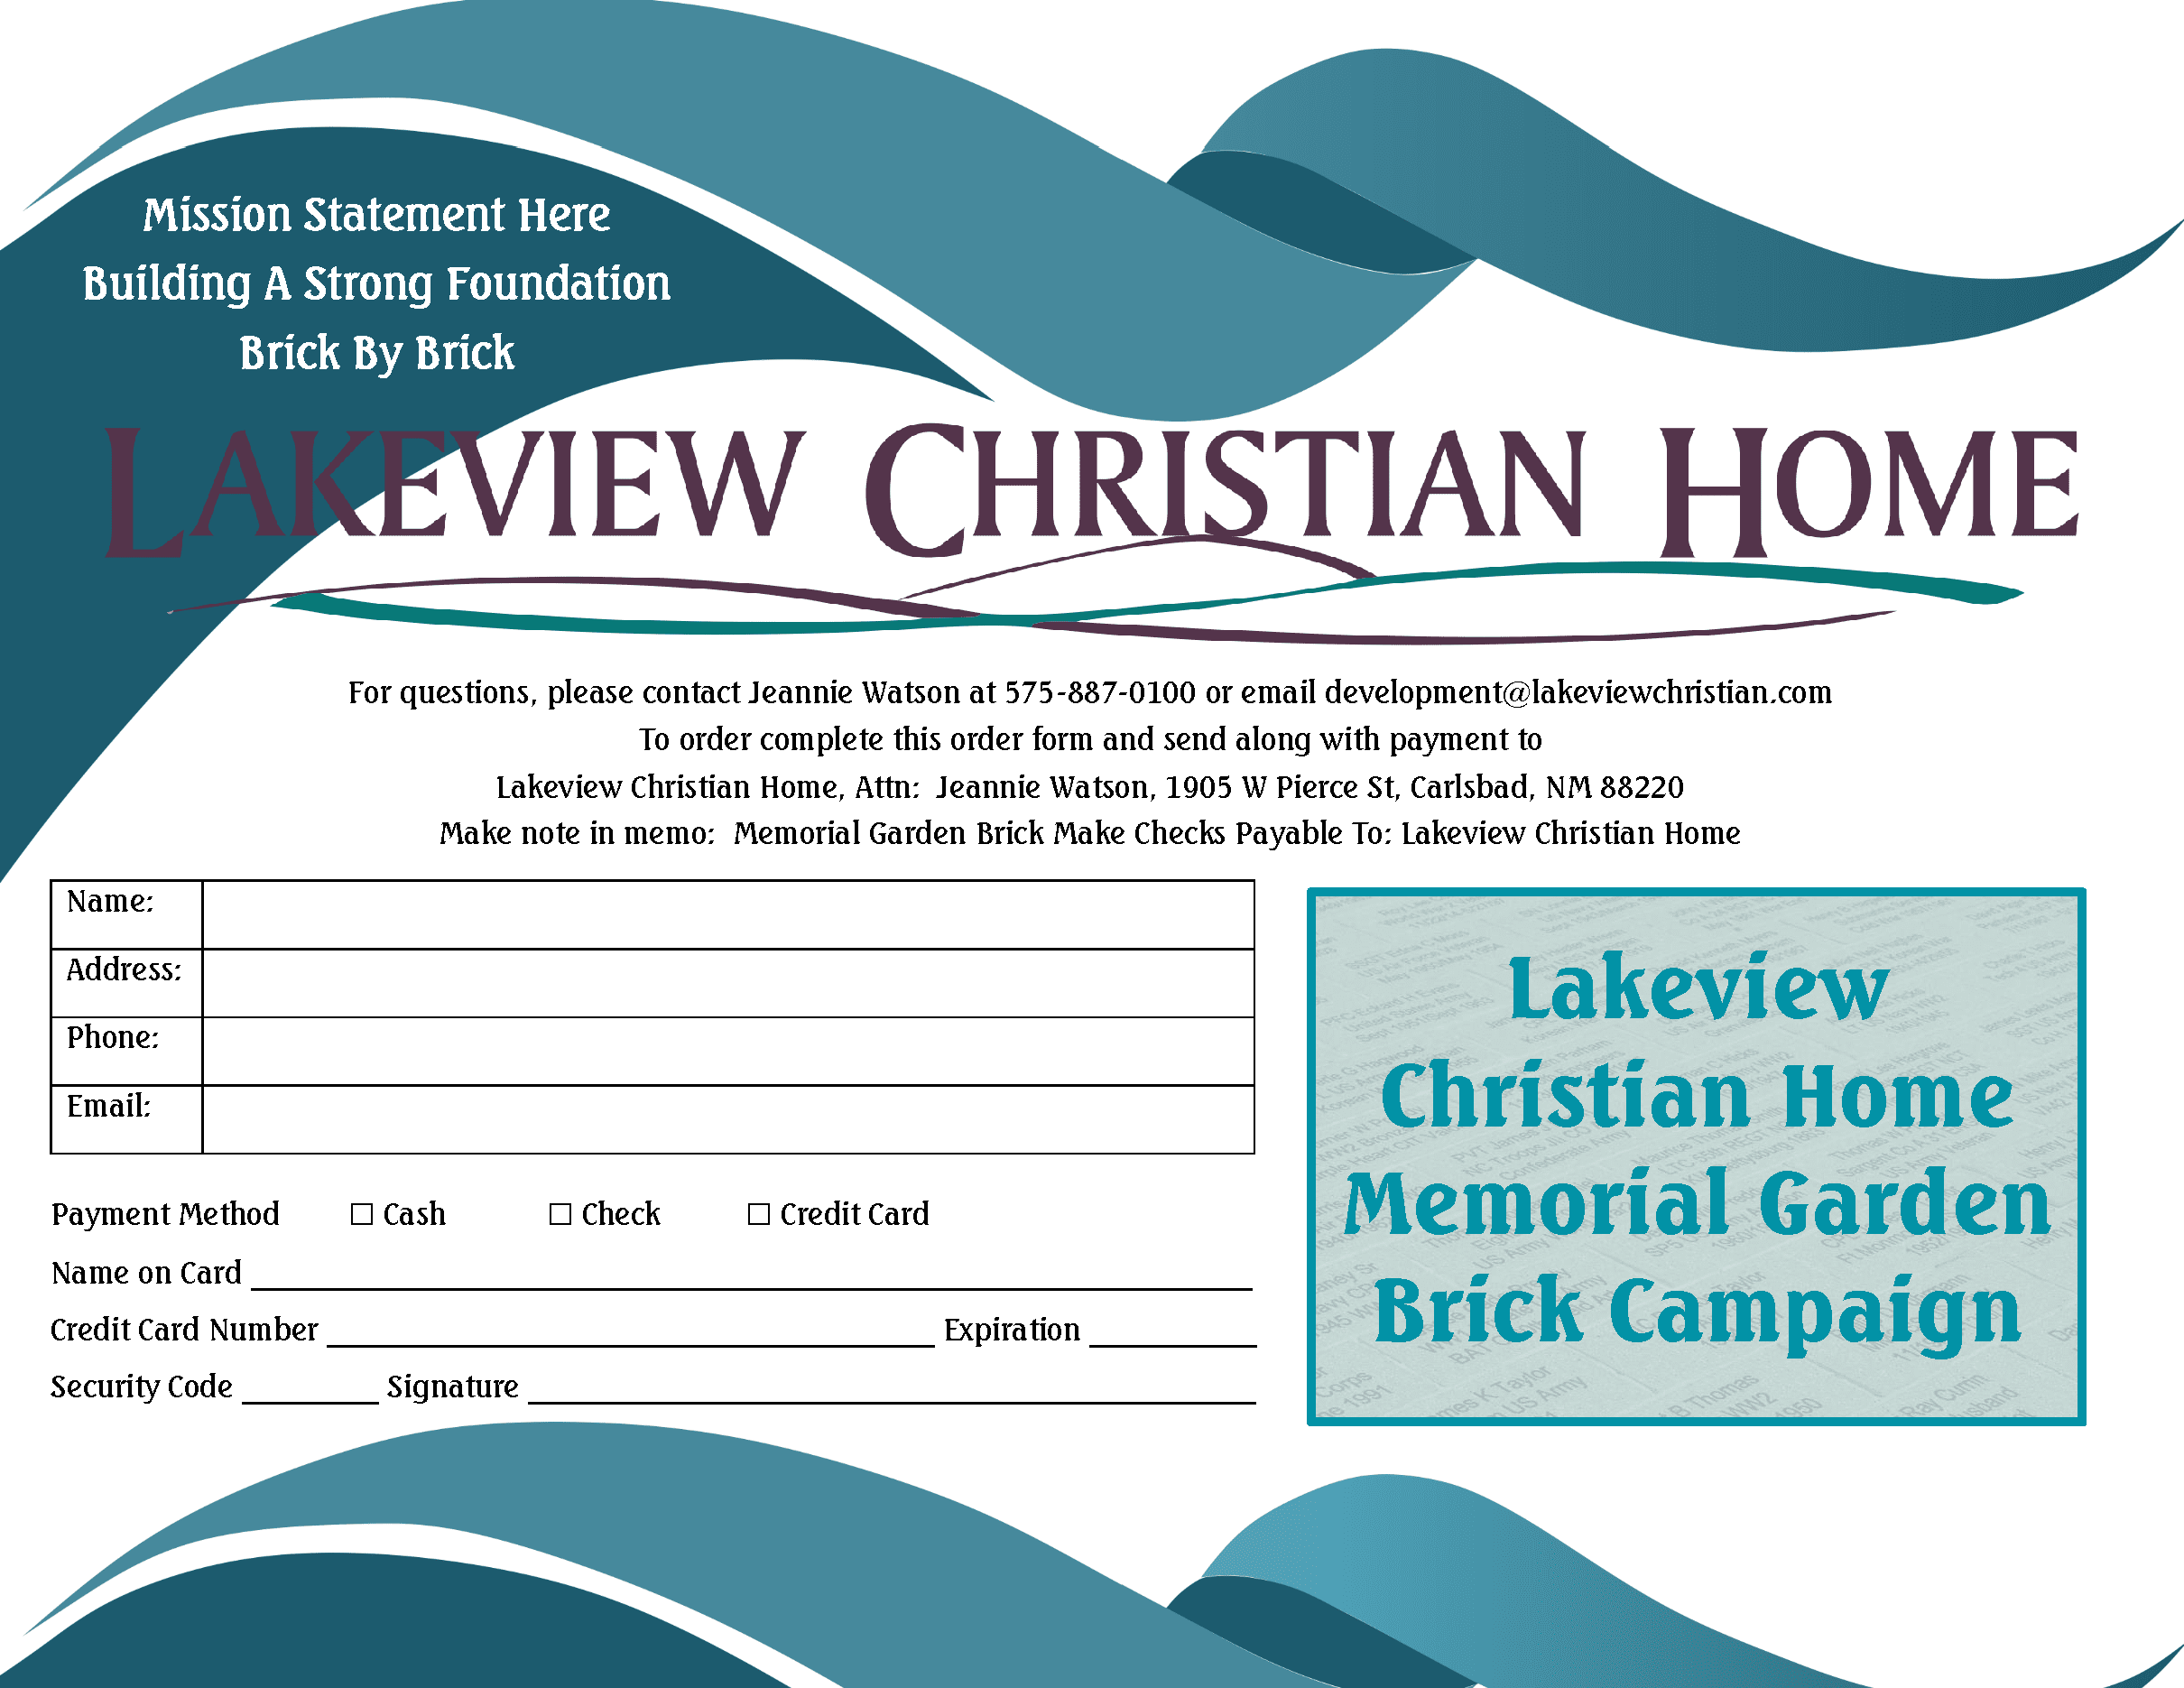 campaign flyer for engraved brick fundraiser